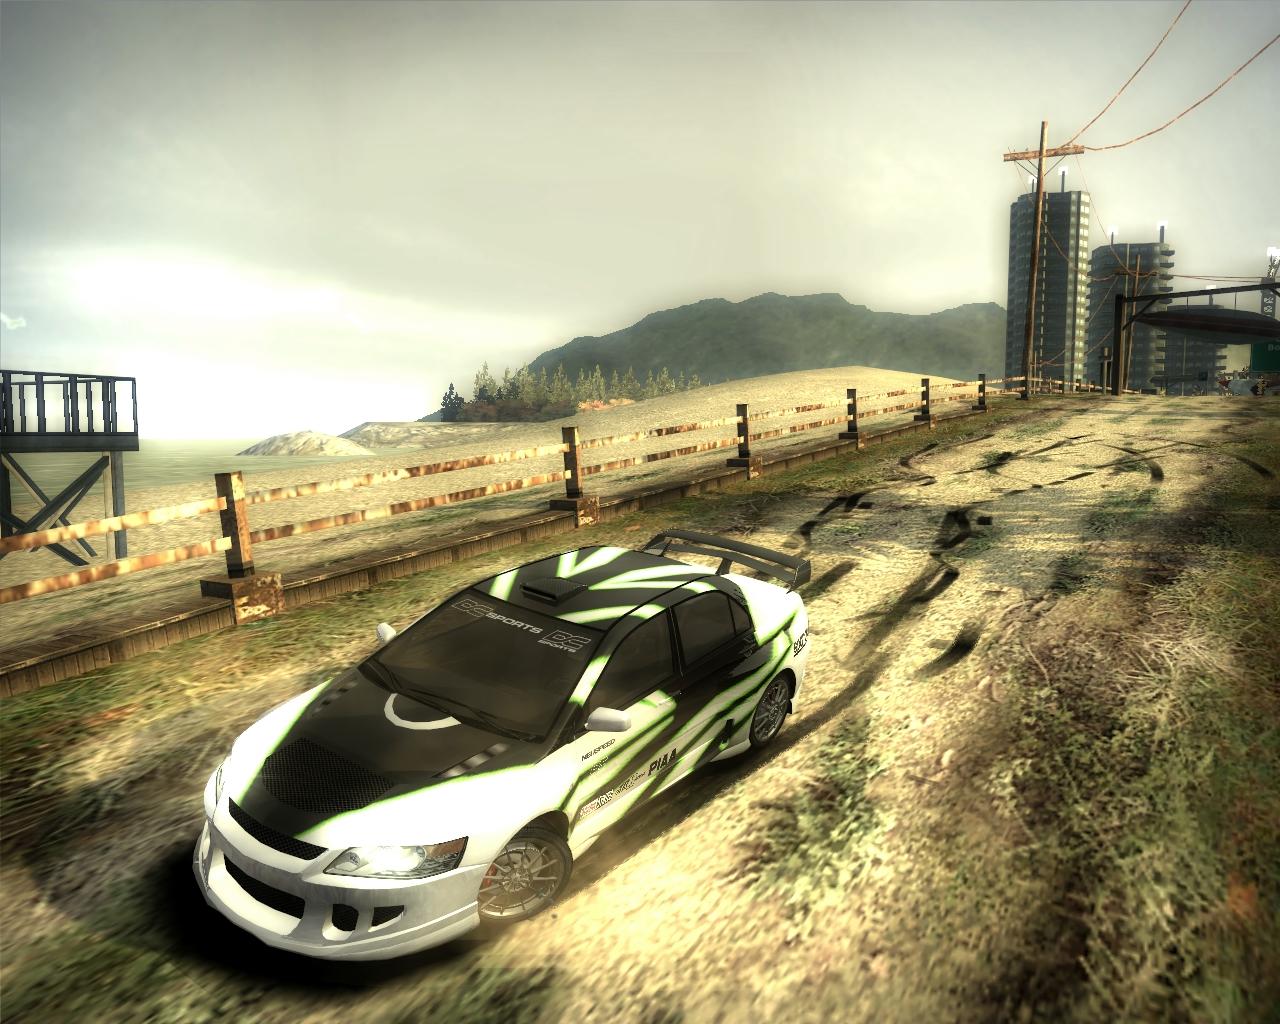 Nfs mw 2. NFS most wanted. NFS MW 2005. Нид фор СПИД мост вантед 2005. Игра NFS most wanted 2005.